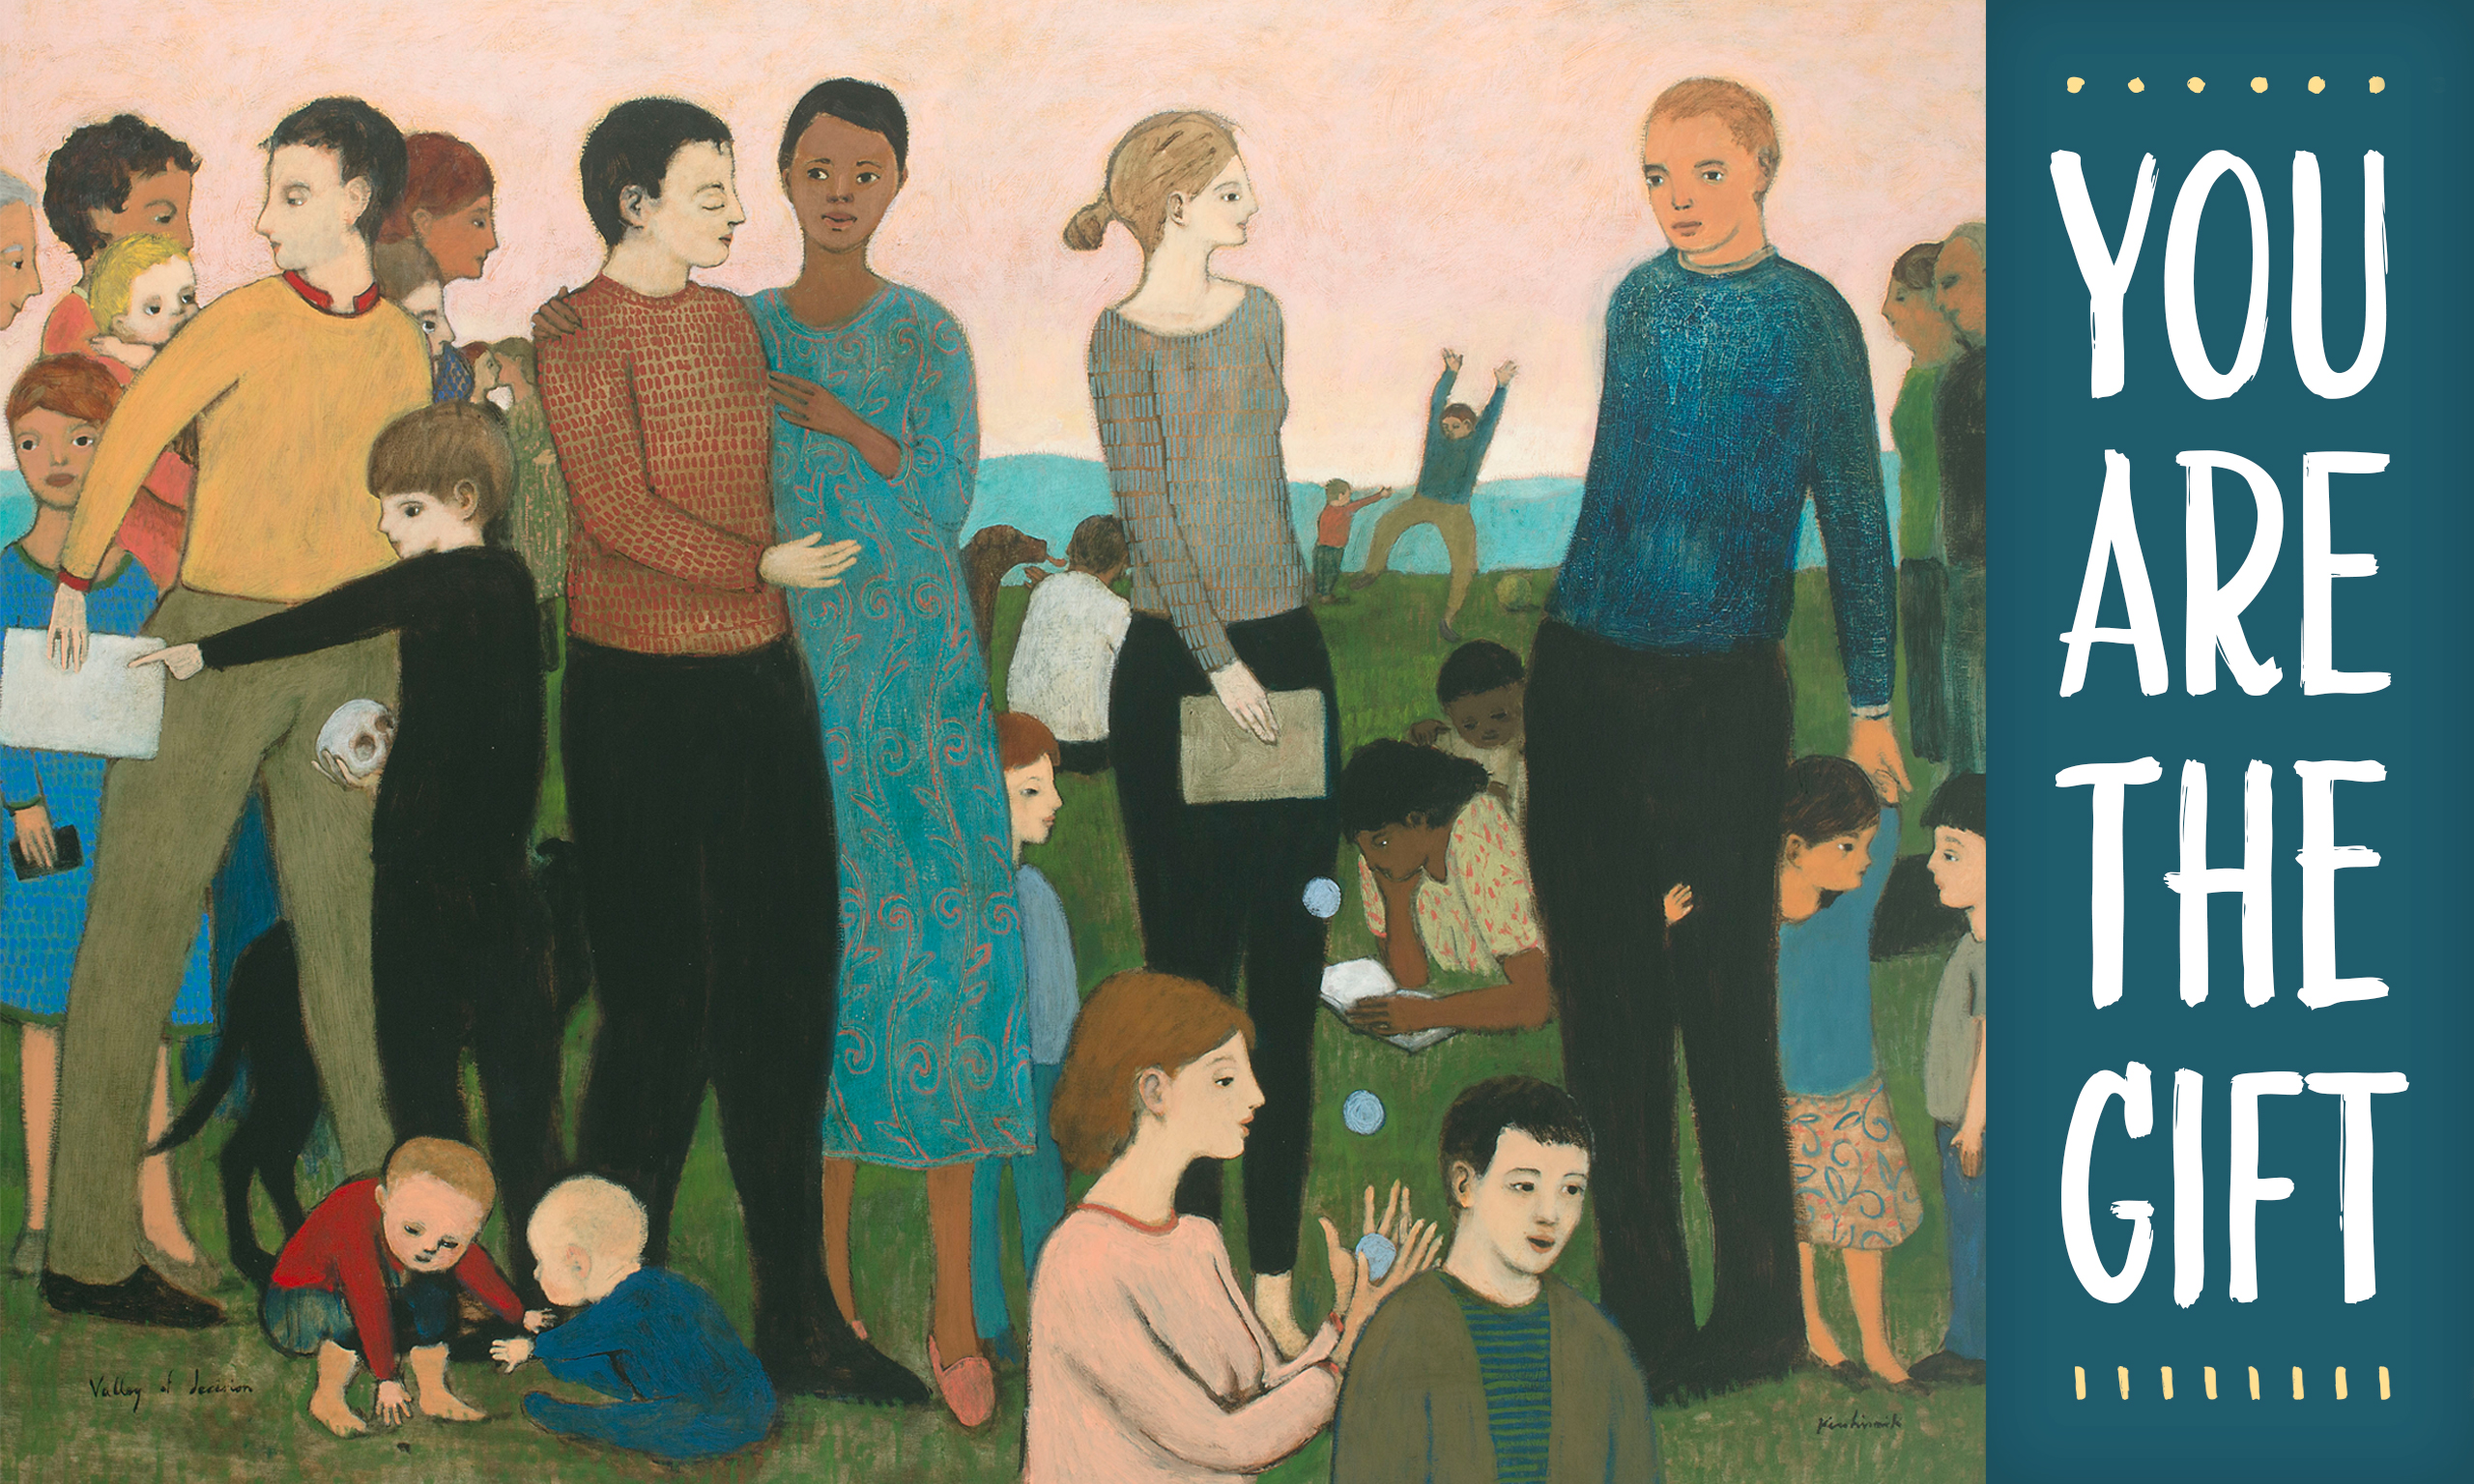 A painting of a group of people in a field. Some play with children, one juggles, some read, and many are gathered together. The article title, "You Are the Gift," is included in the art.